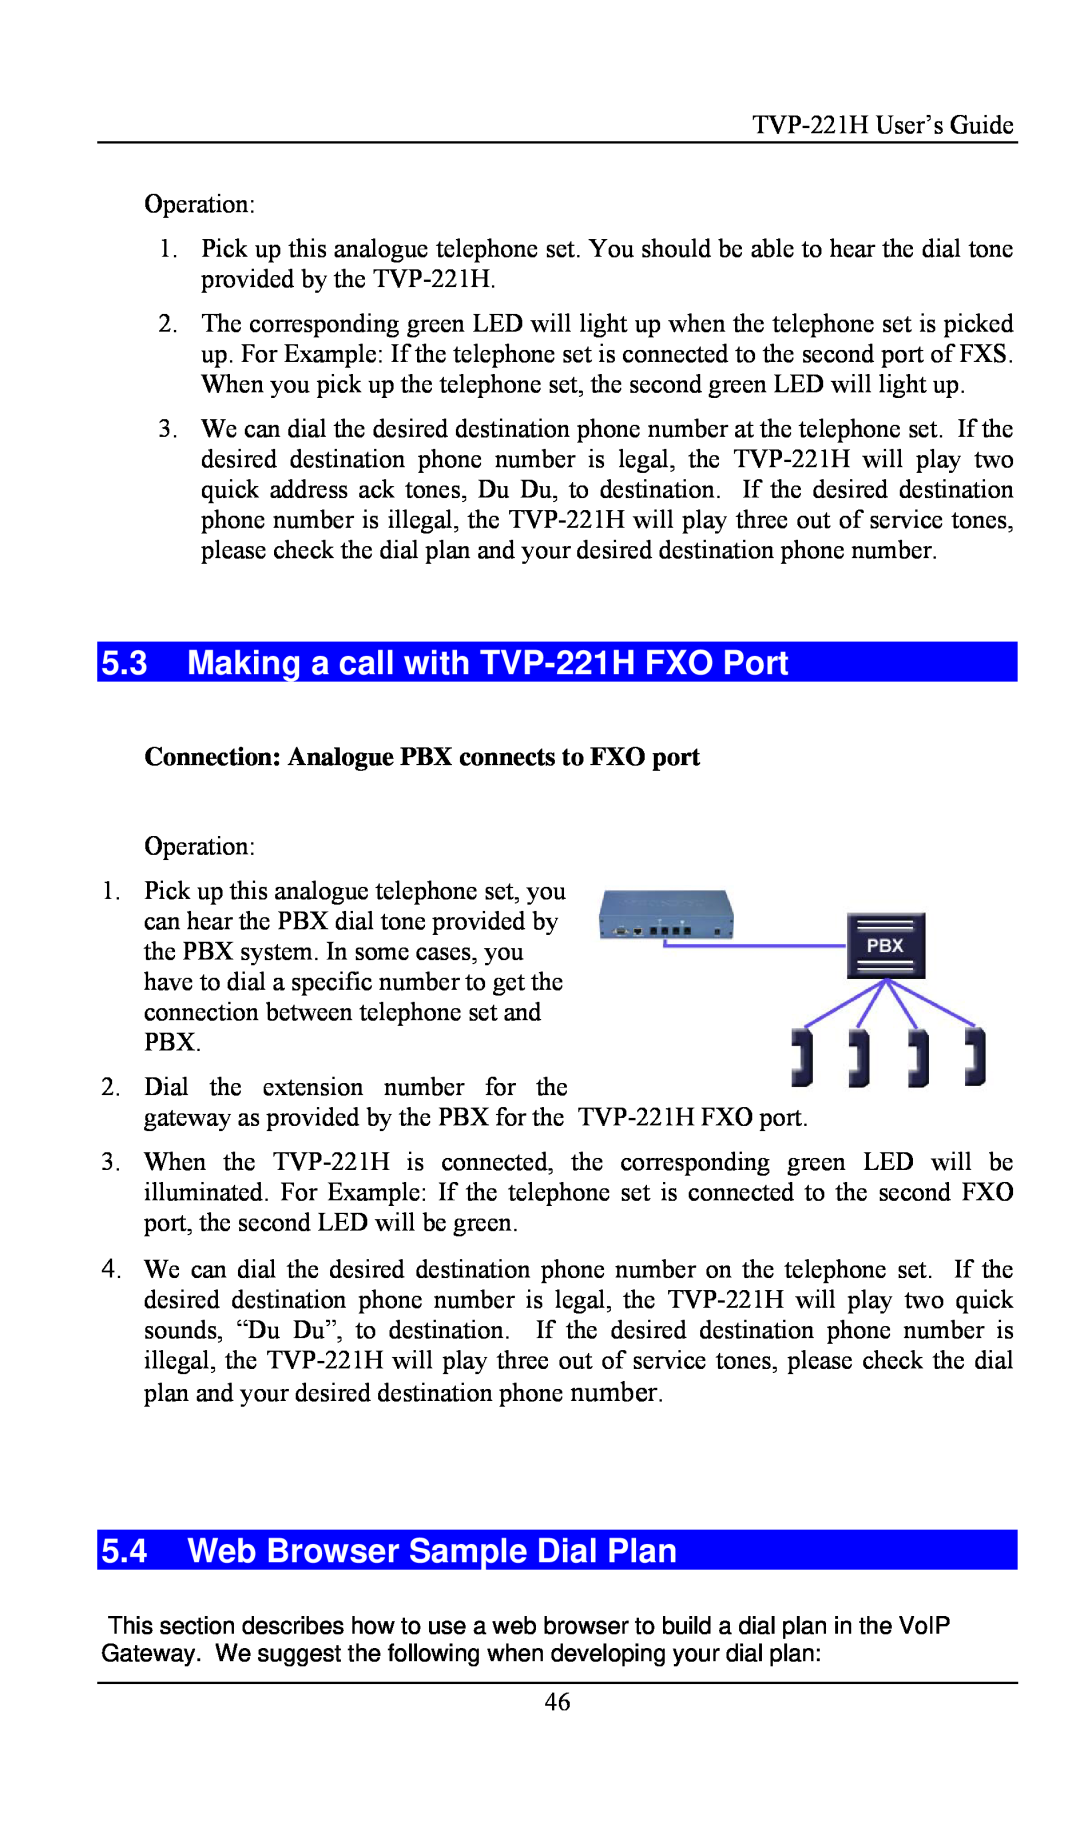 TRENDnet TVP- 221H, VoIP Gateway manual Making a call with TVP-221H FXO Port, Web Browser Sample Dial Plan 